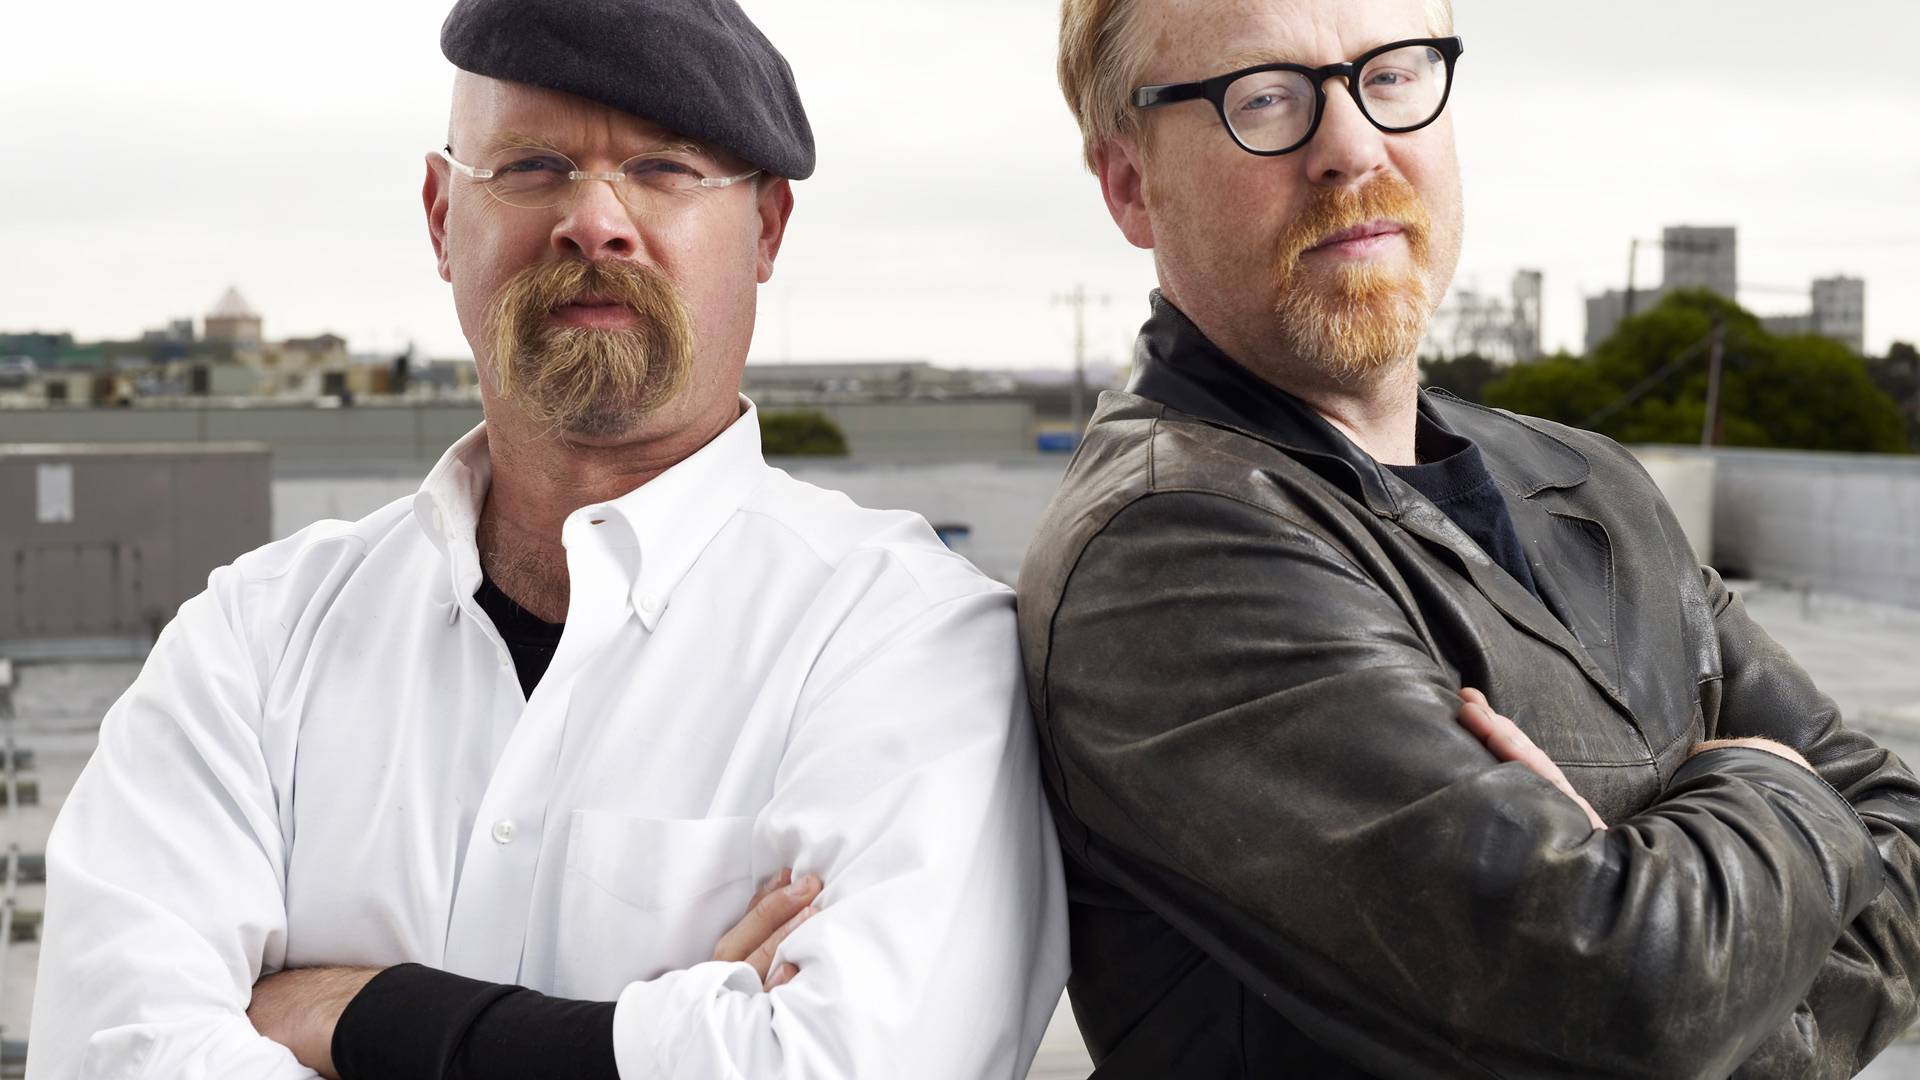 tv show, mythbusters